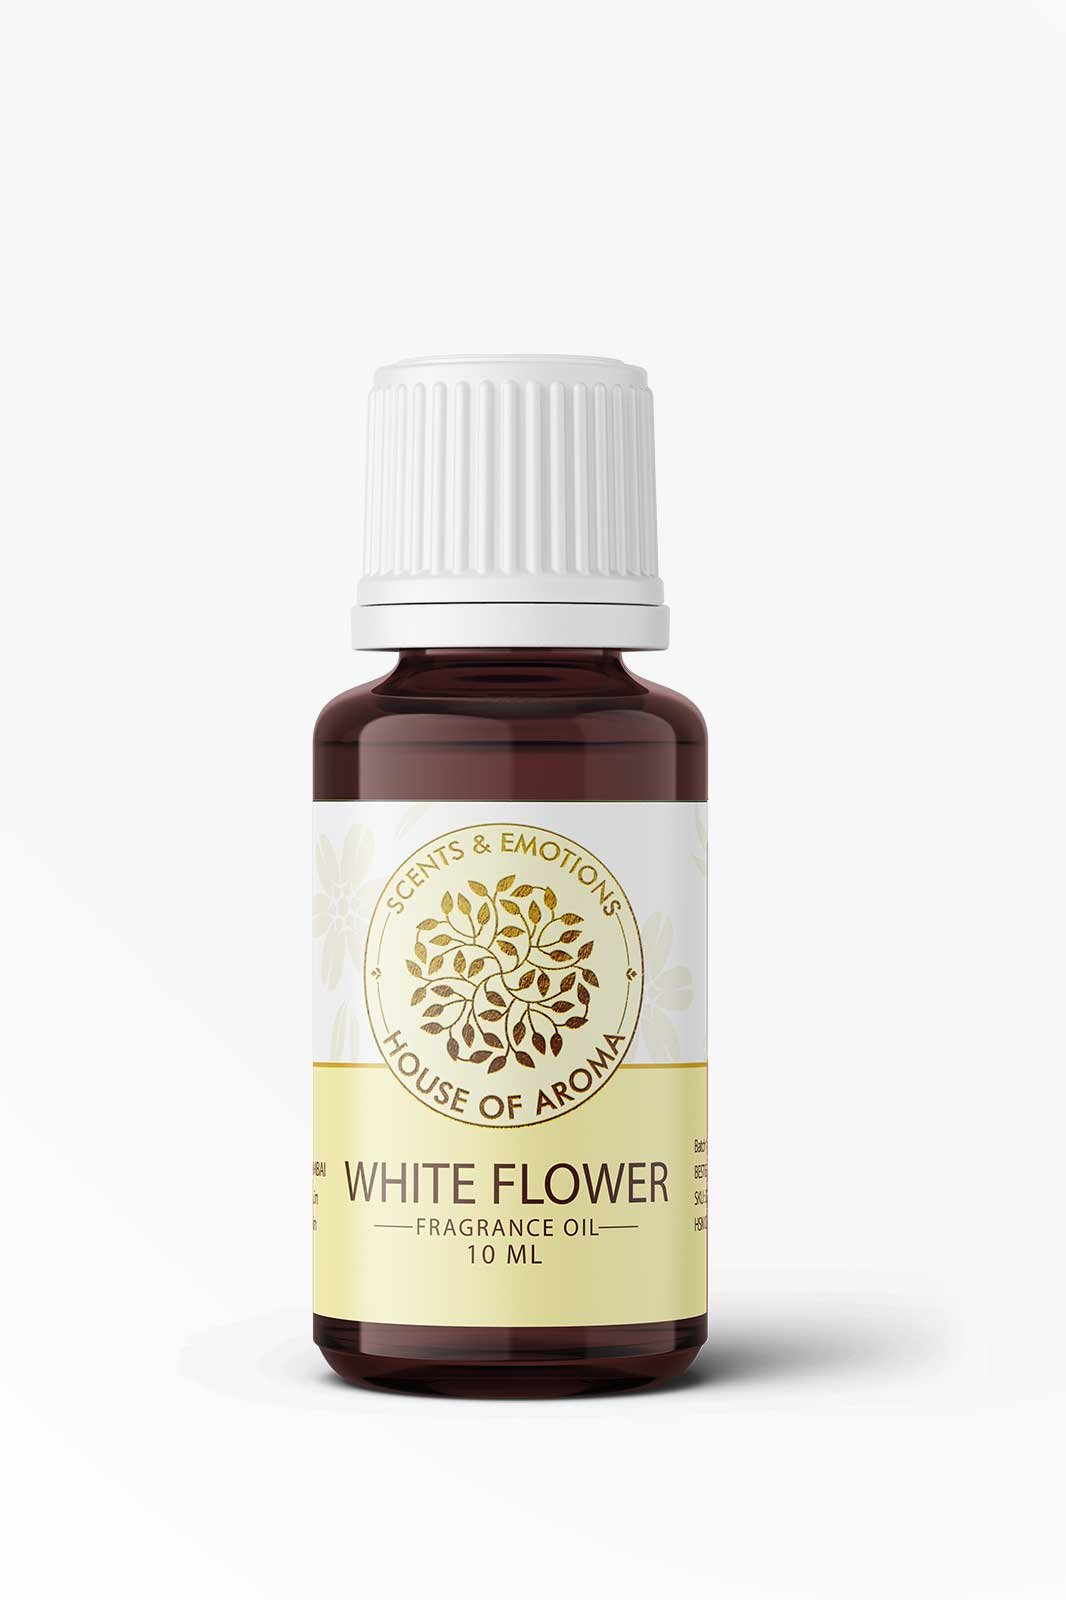 white flower fragrance, white flower with fragrance, white scented flowers in india, what is white floral scent, white flower fragrance oil, white flower oil scent, white floral fragrance oil, flowers fragrance, fragrance white flowers, white flower nice smell, white lily flower fragrance, white floral fragrances, white floral musk fragrance, best white flower fragrance, white flowers in fragrance, white, flower home fragrance, House of aroma, fragrance oil, fragrance oils, fragrance oils for candles, fragrance oils for soap, fragrance oil for perfume, fragrance oil lavender, fragrance oil on skin, fragrance oil uses, fragrance oil manufacturers, fragrance oil for incense sticks, fragrance oil online, fragrance oil air freshener, fragrance oil benefits, premium fragrance oil brand, top fragrance brands in the world, premium fragrance oil for candles, premium quality fragrance oils, best fragrance brand in the world, top 10 luxury fragrance brands, fragrance oil brands, top fragrance companies in india, fragrance brands in india, fragrance oil suppliers in india, best fragrance oil brands for candles, best aroma oil brands in india, best fragrance oil brands, world's best fragrance brands, aroma oil brands, fragrance oil brands in india, top fragrance oil brands, brands of fragrance oil, fragrance oil for diffuser, fragrance oil for reed diffuser, fragrance oil for mist diffuser, fragrance oil for electric diffuser, aroma oil or essential oil, fragrance oil for water diffuser, fragrance oil or essential oil for wax melts, fragrance oil diffuser set, fragrant oil for diffuser.